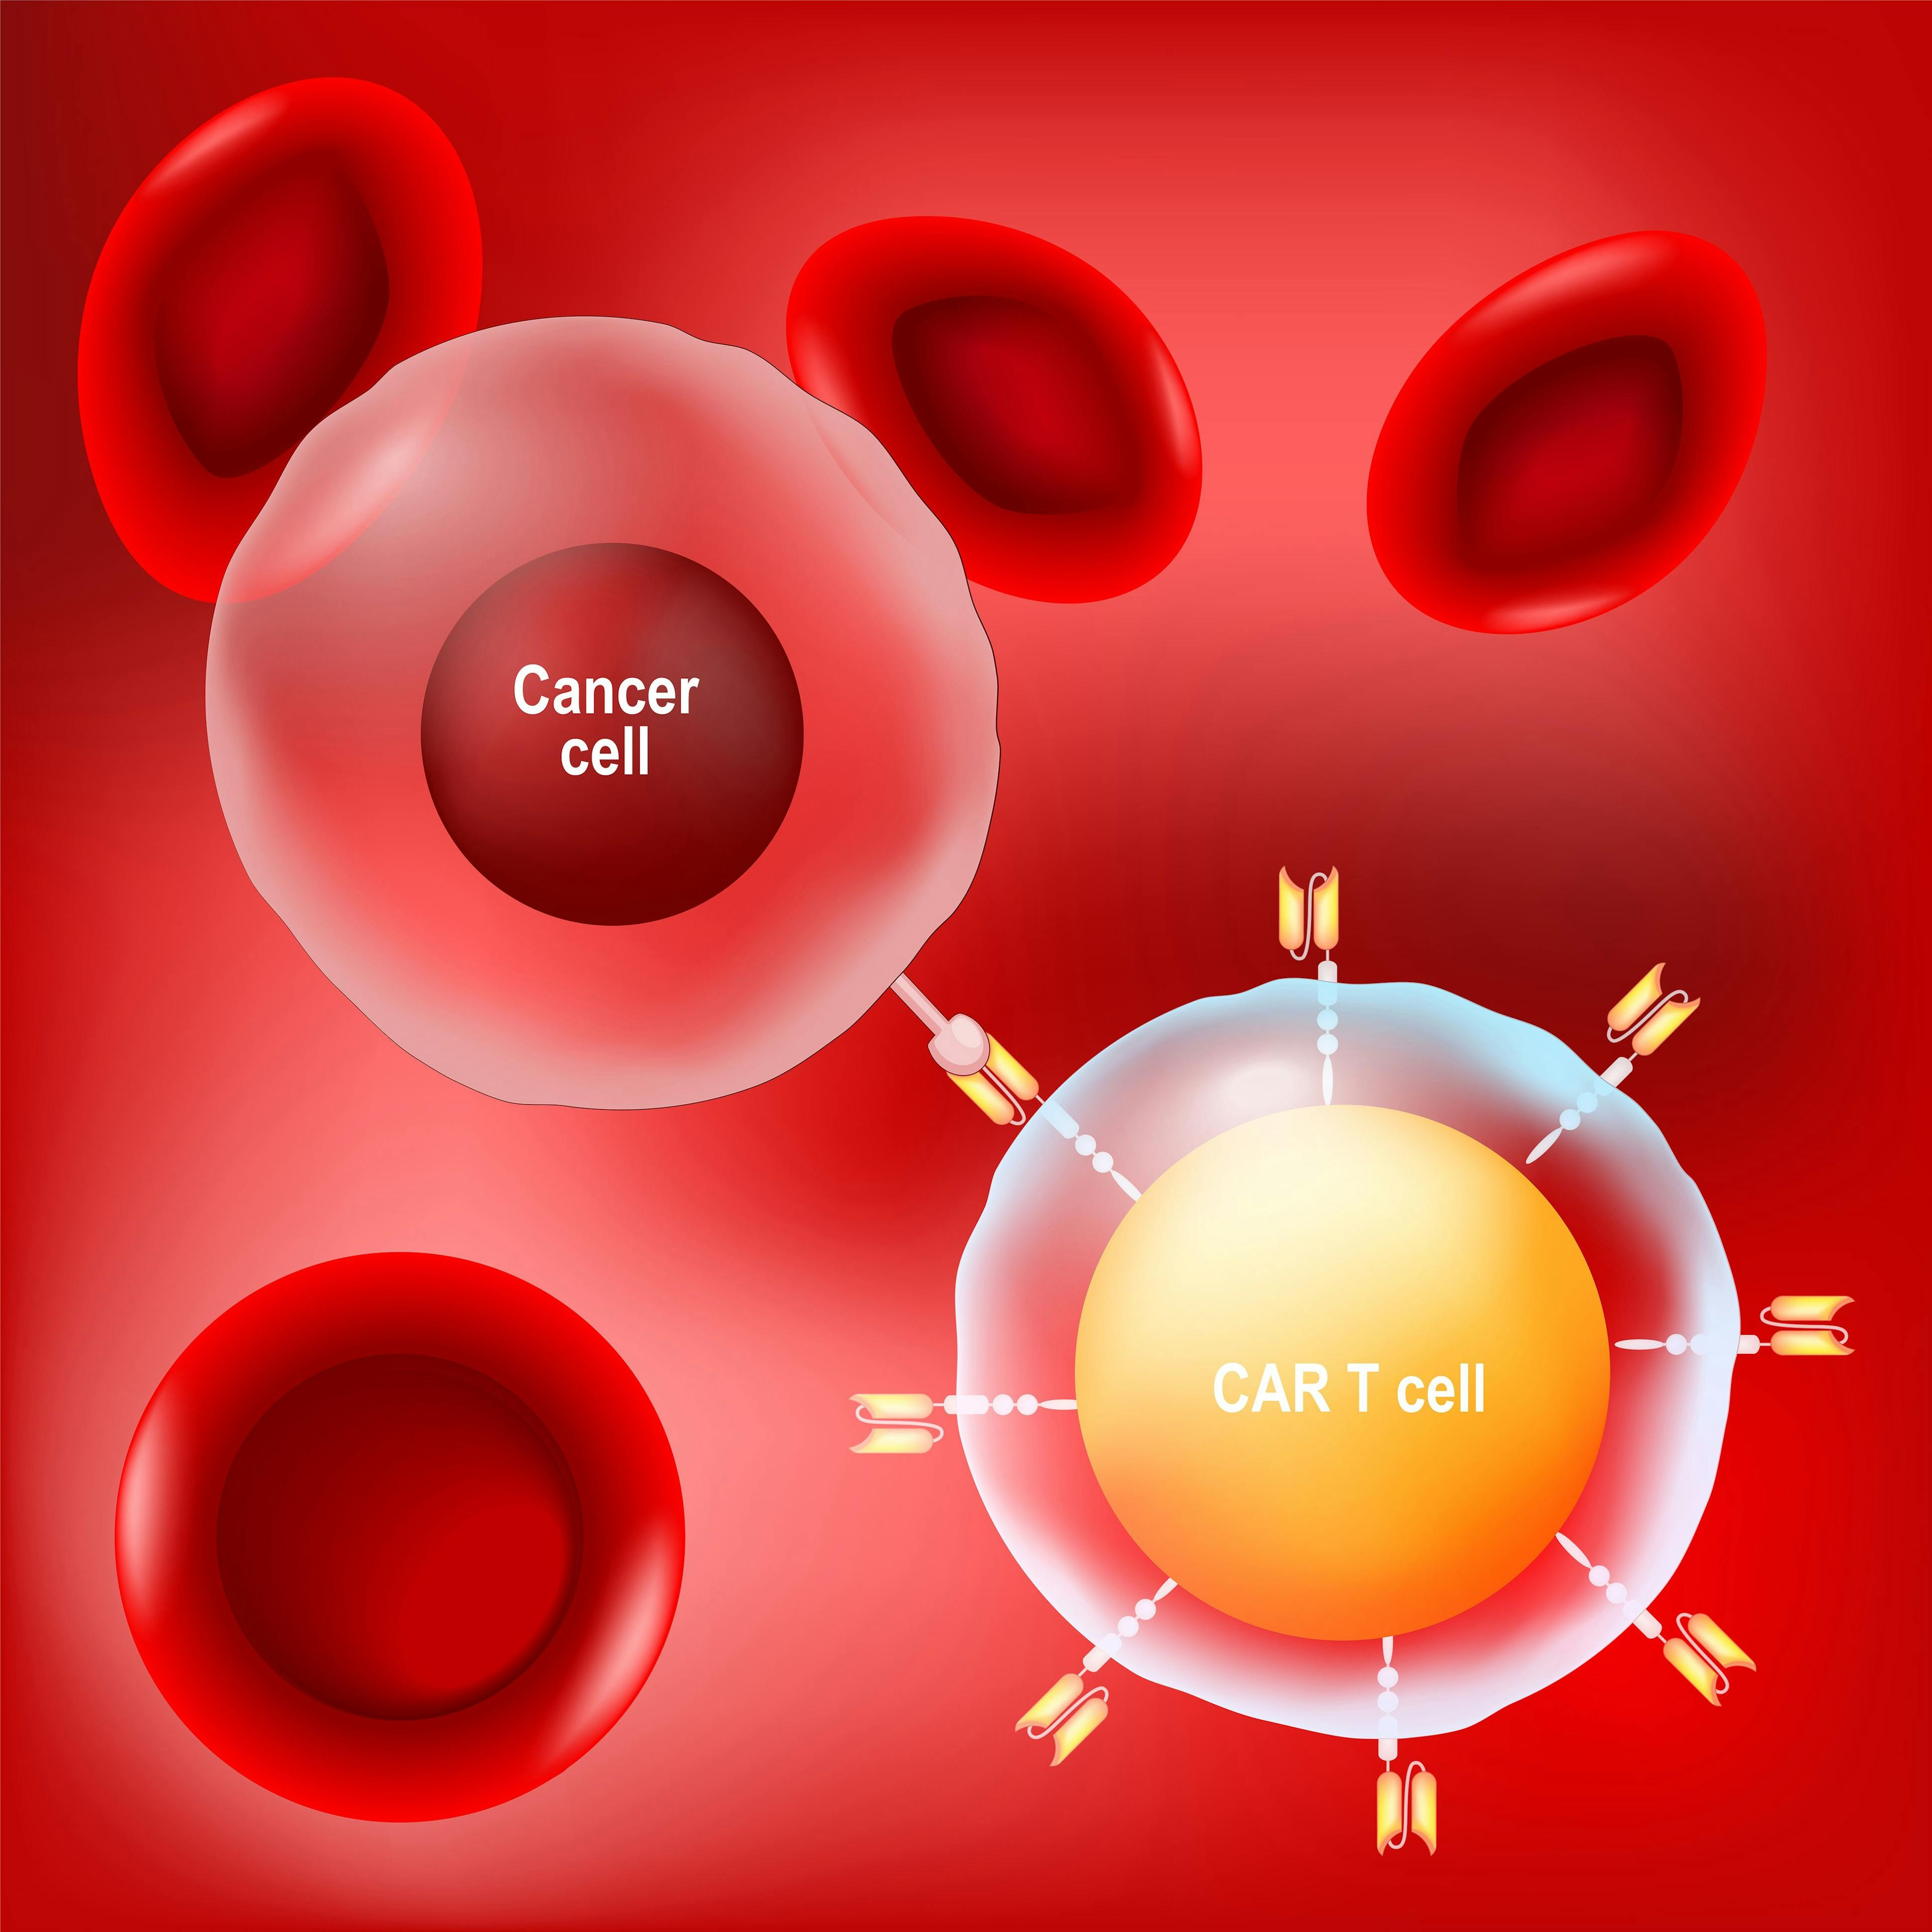 Cancer cell, CAR t-cell and red blood cells on red background | Image credit: © designua - © stock.adobe.com